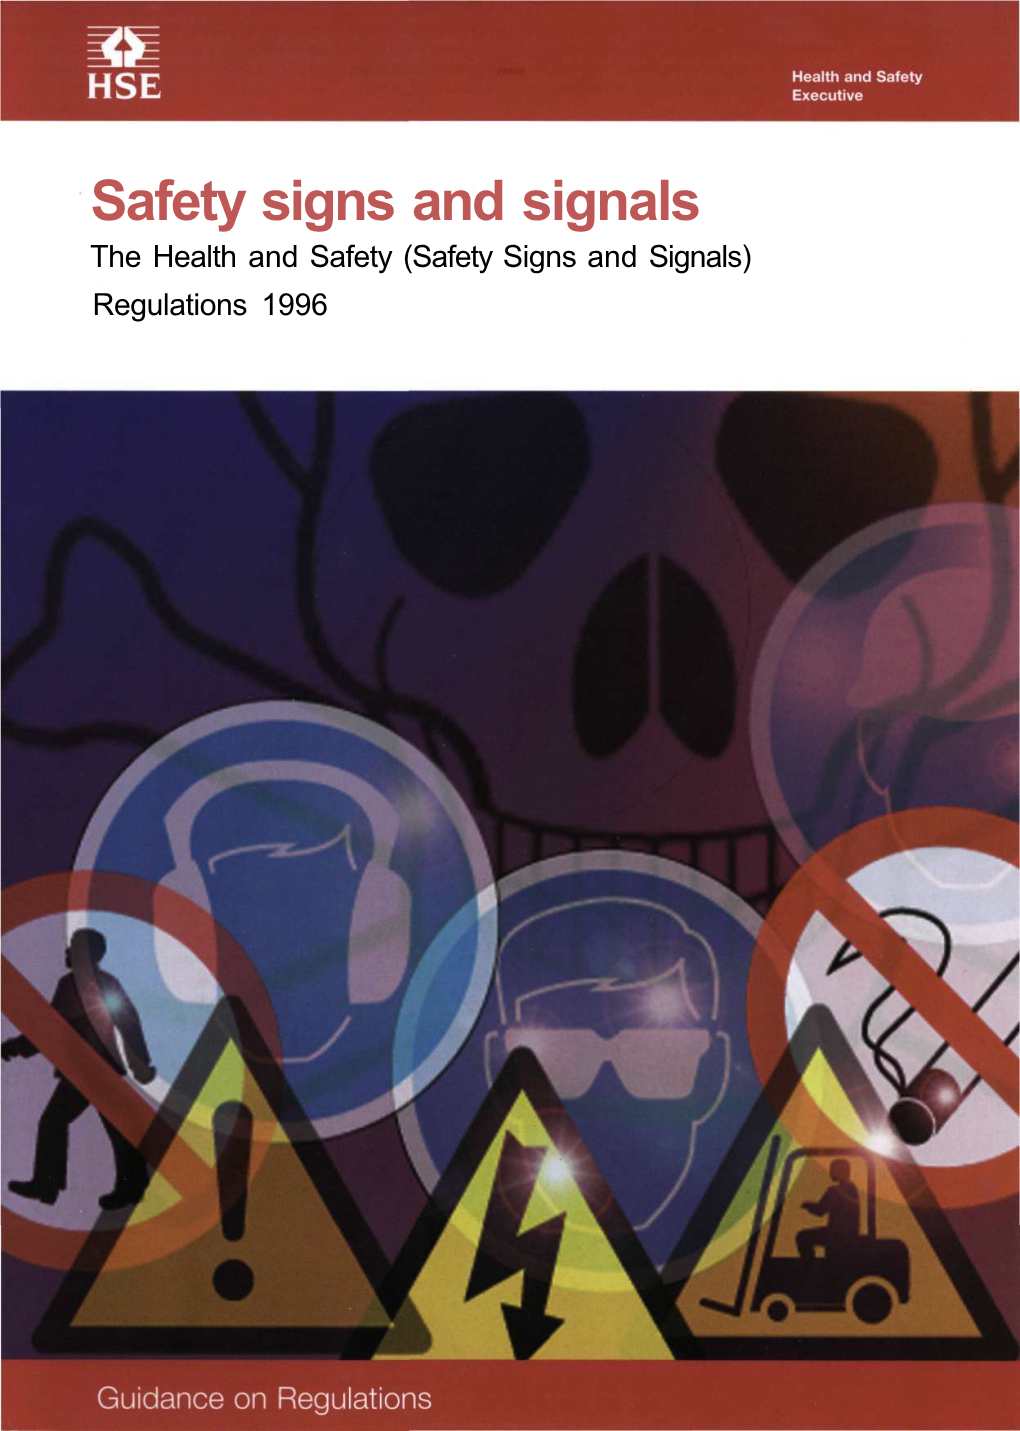 (Safety Signs and Signals) Regulations 1996 Safety Signs and Signals the Health and Safety (Safety Signs and Signals) Regulations 1996